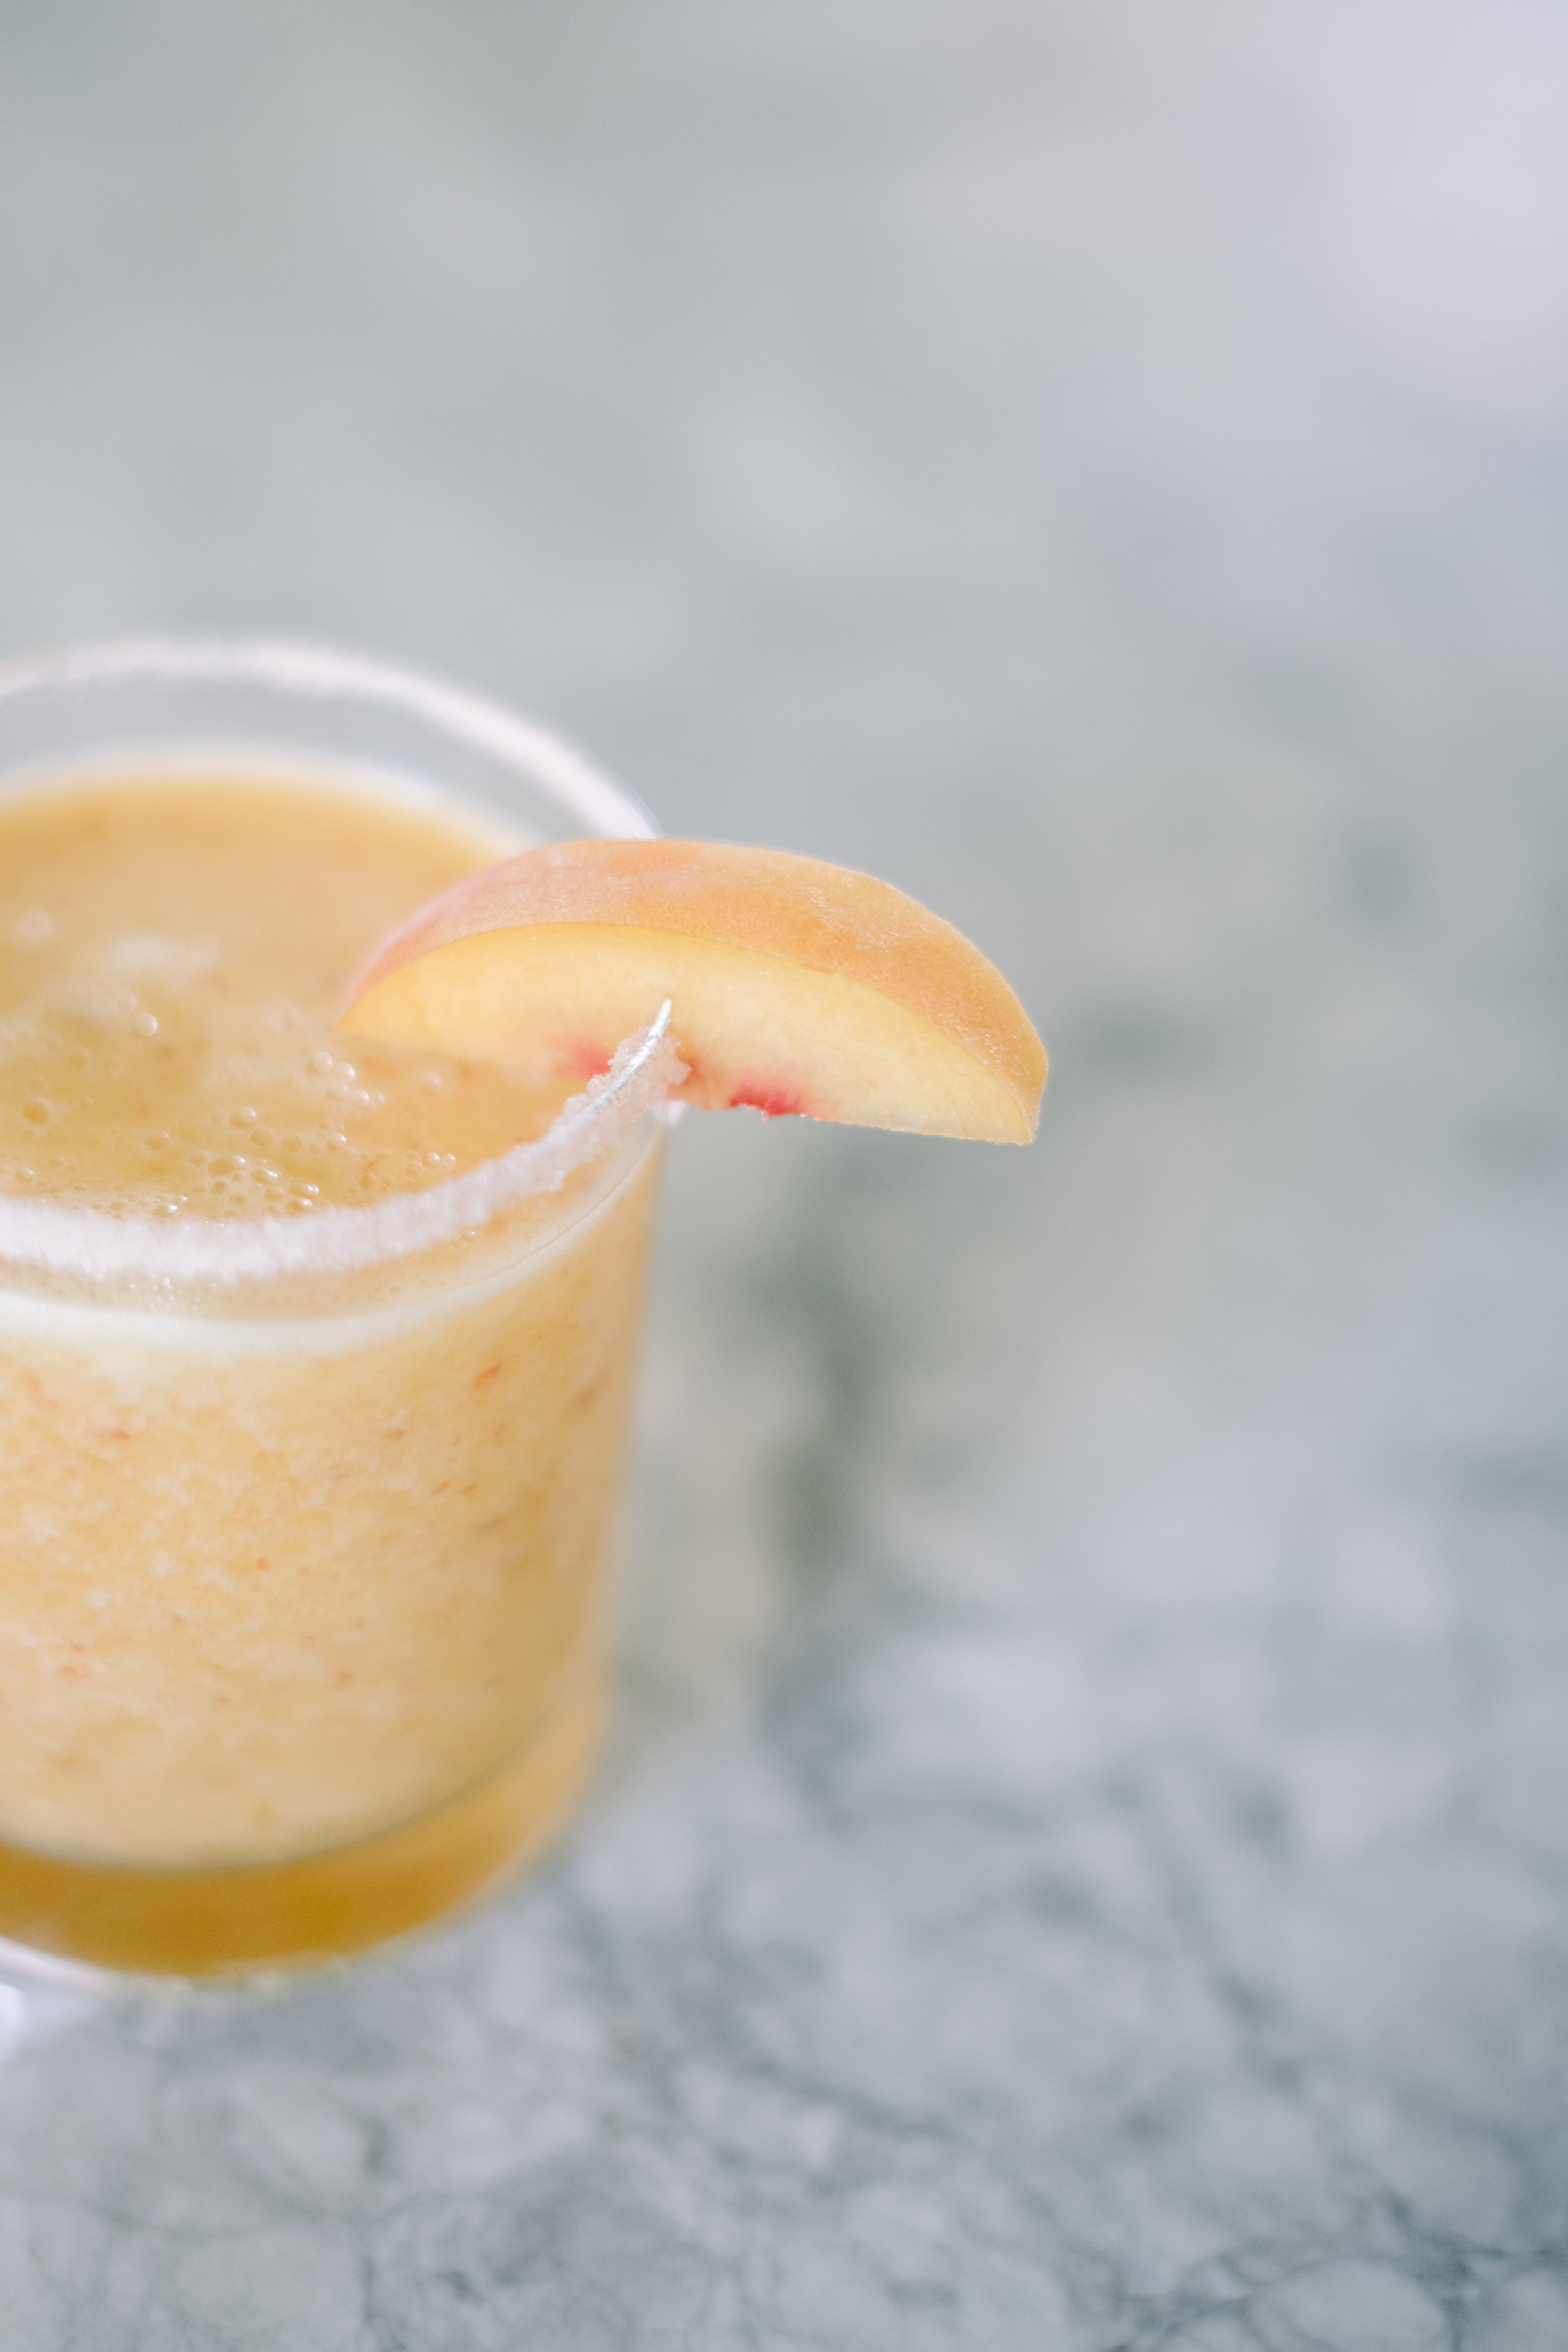 Peach margarita recipe with lime juice, perfect on the rocks or blended. Easy, simple and fresh with peaches and La Croix. Easy Peach Margaritas.